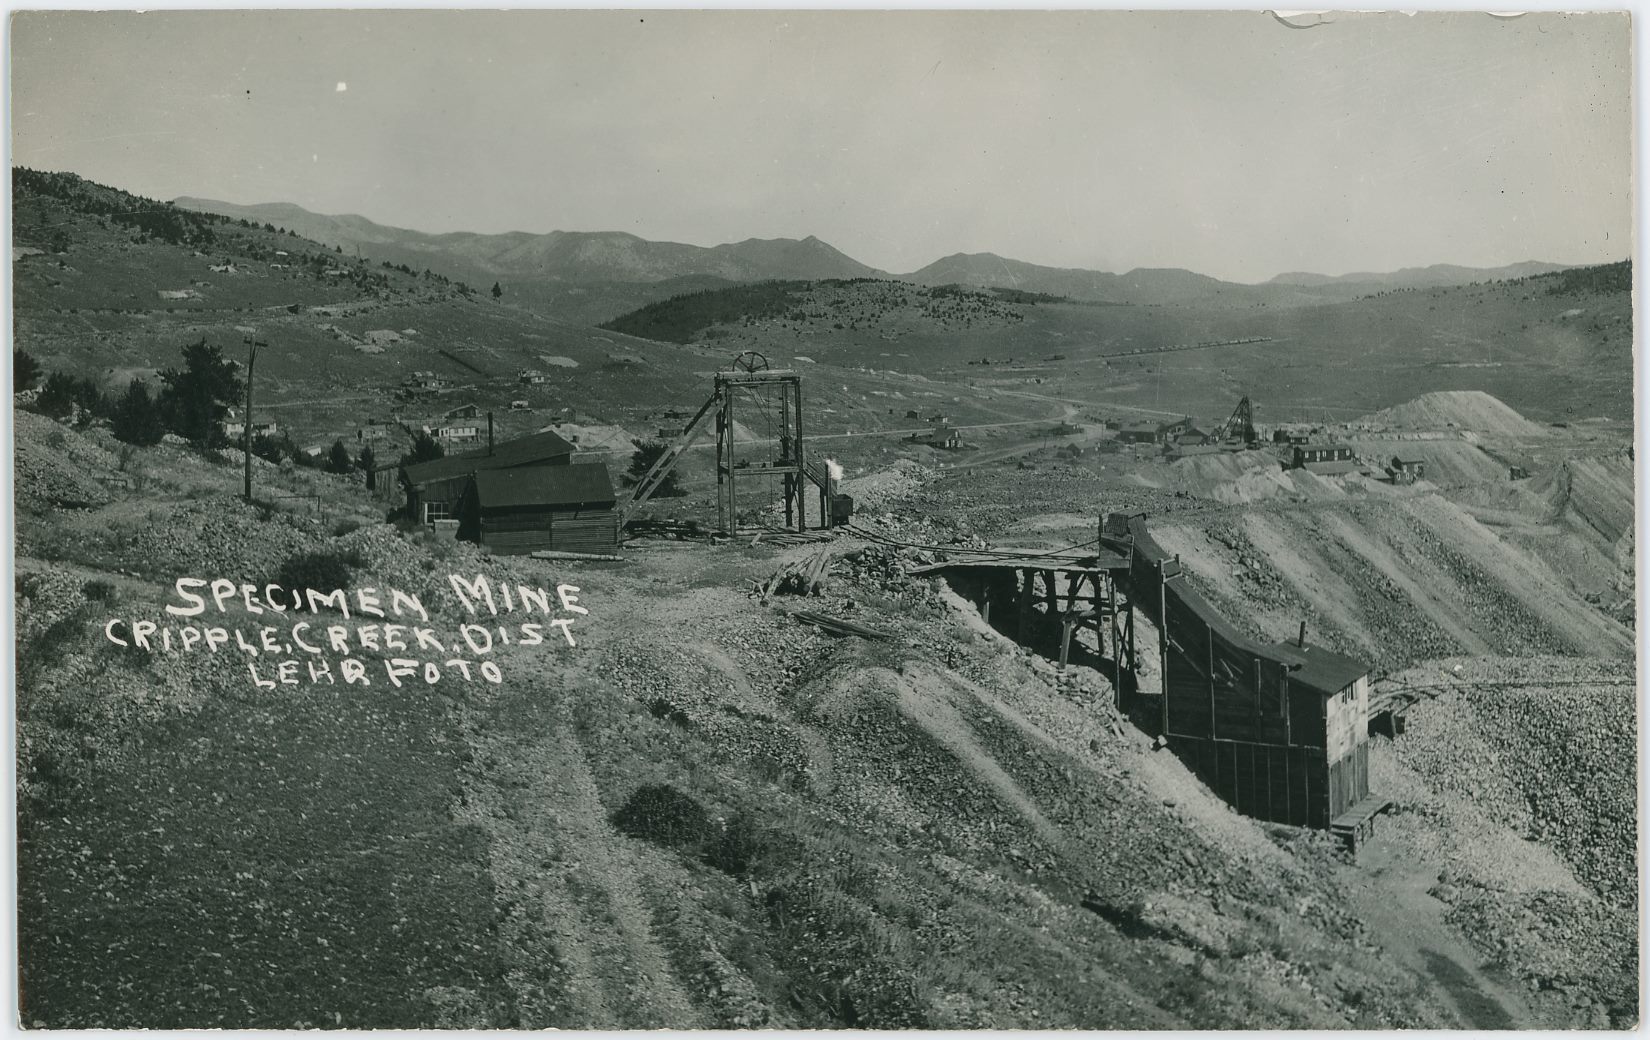 Direction of this view is east, northeast, on Bull Hill, just west of the surface structures of the Specimen Mine operation, with an open Head-Frame and Hoist-house and shed linked to it, and a small Ore-house to the right down the hillside a small bit.
   In the distance, up from the orehouse, the surface structures of the Vindicator No. 1 Mine are seen with a large Head-frame and Ore-house down into massive dumps, impossible to tell if it still is linked to a railroad or not in this view. Further on in the distance to the left, a big string of railroad cars say that the Midland Terminal is still in operation, but there is no trace of the High Line Electric Division, as where that should be I only see a road surface – cutting almost the headframe of the Specimen Mine in two so to speak.
   Image is not sharp enough to tell if there are any rails left on the old Golden Circle tracks seen climbing Bull Hill, or is it Bull Cliff, about 1/4 down from top and about 1/4 in from left-hand side, but I do think the standard gauge M.T. tracks are there still when this photo was taken by Lehr many years ago.